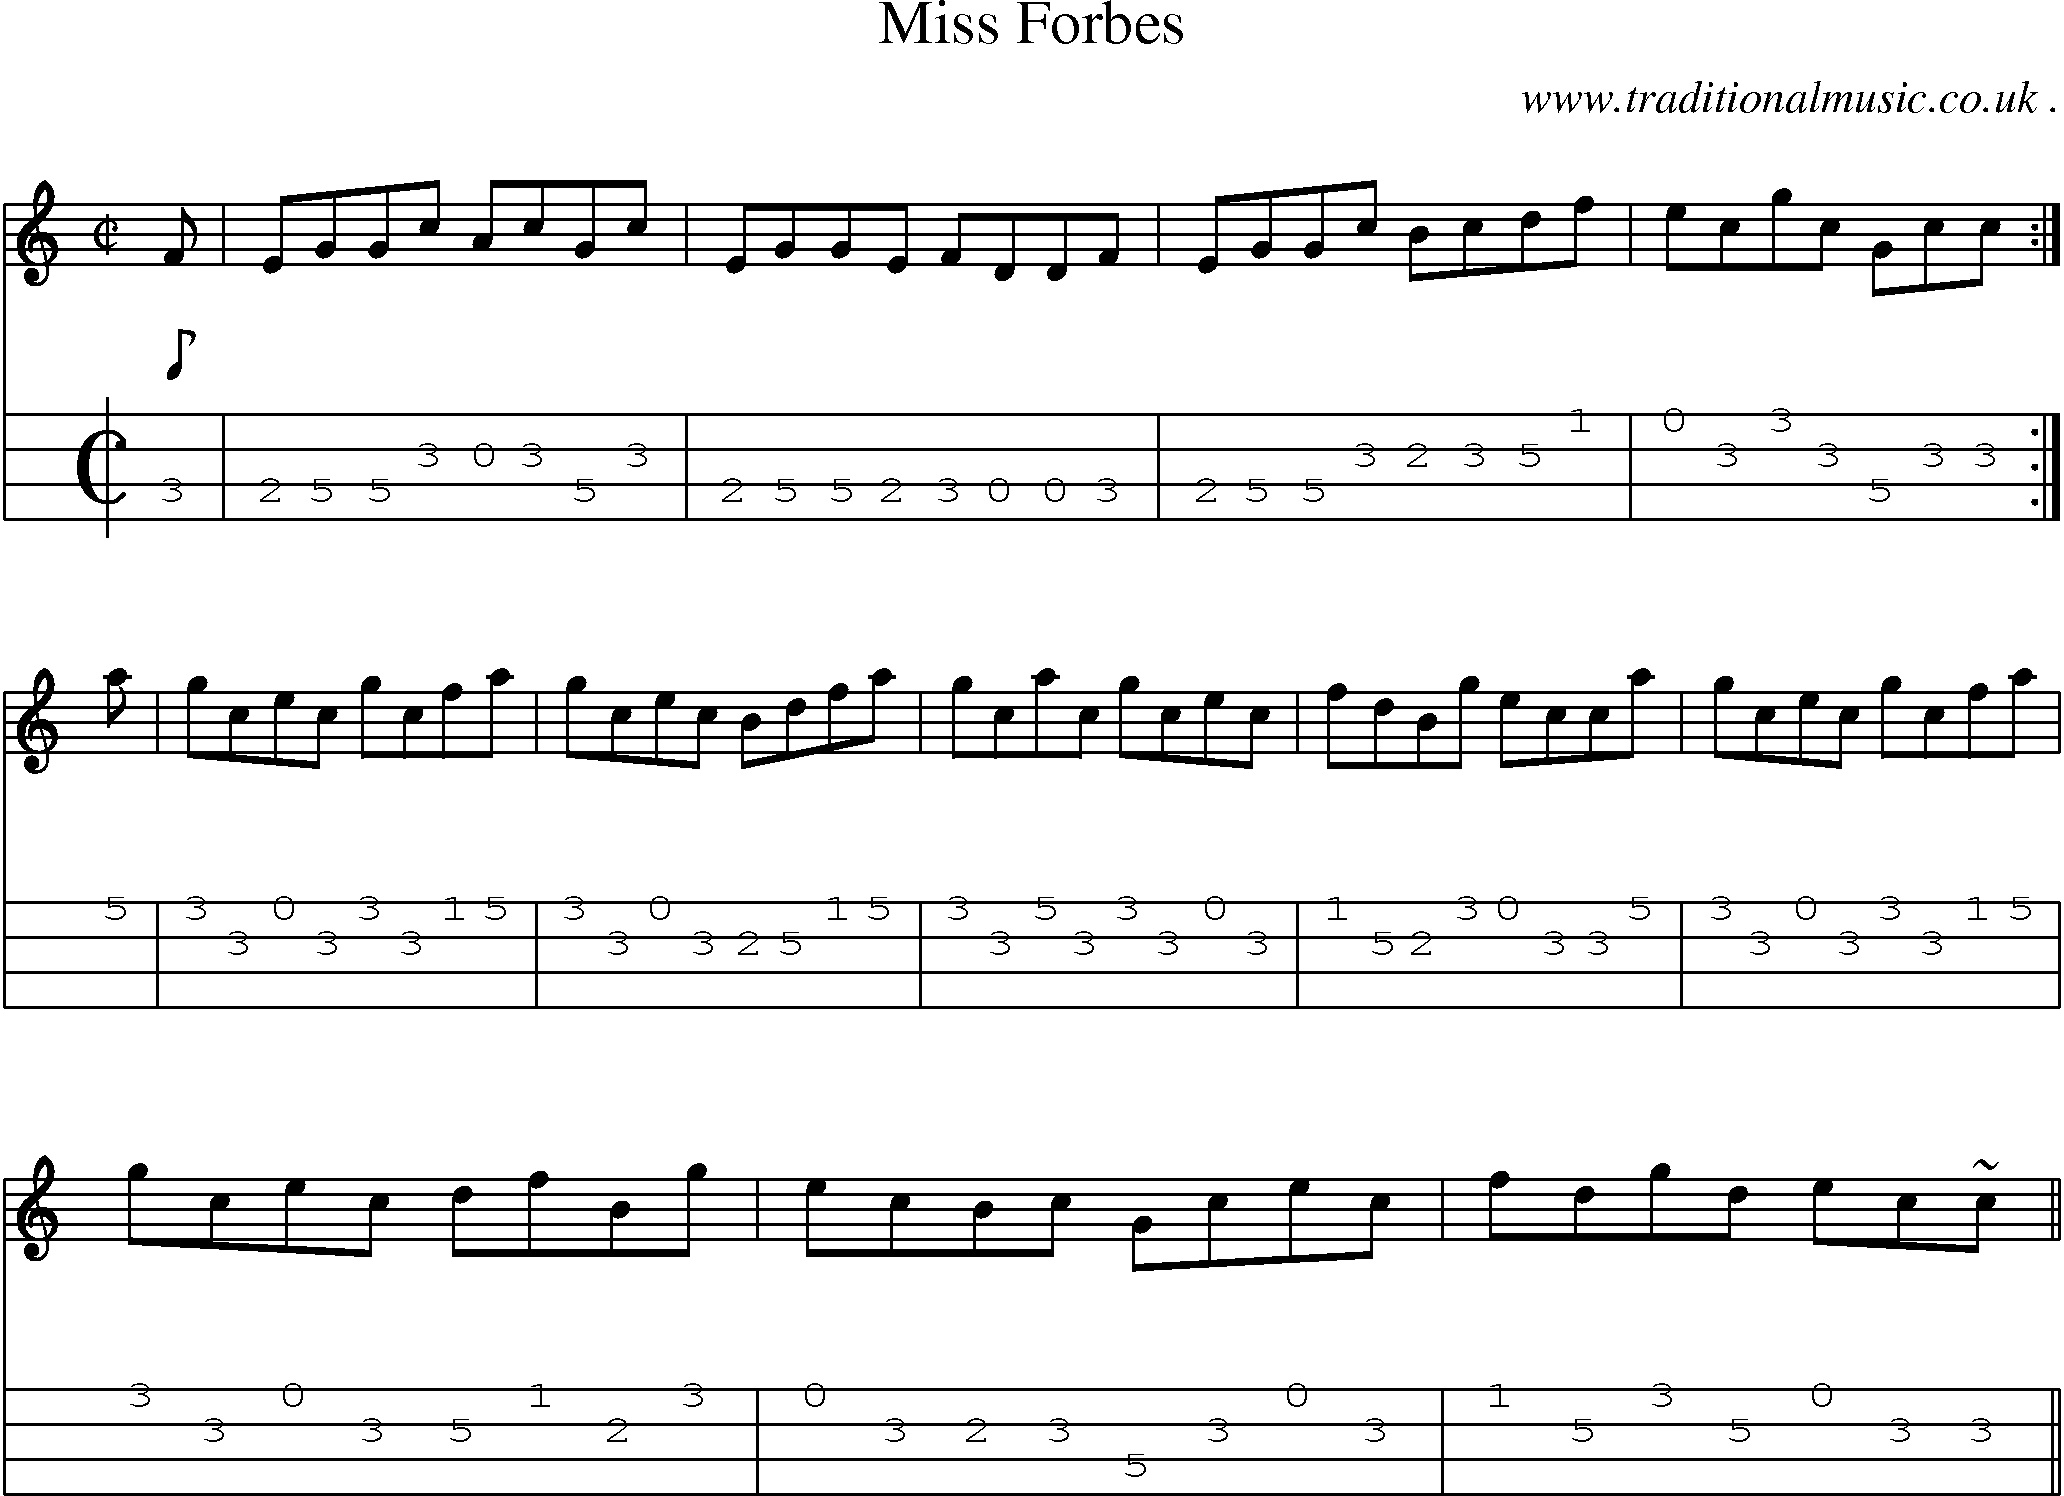 Sheet-music  score, Chords and Mandolin Tabs for Miss Forbes 